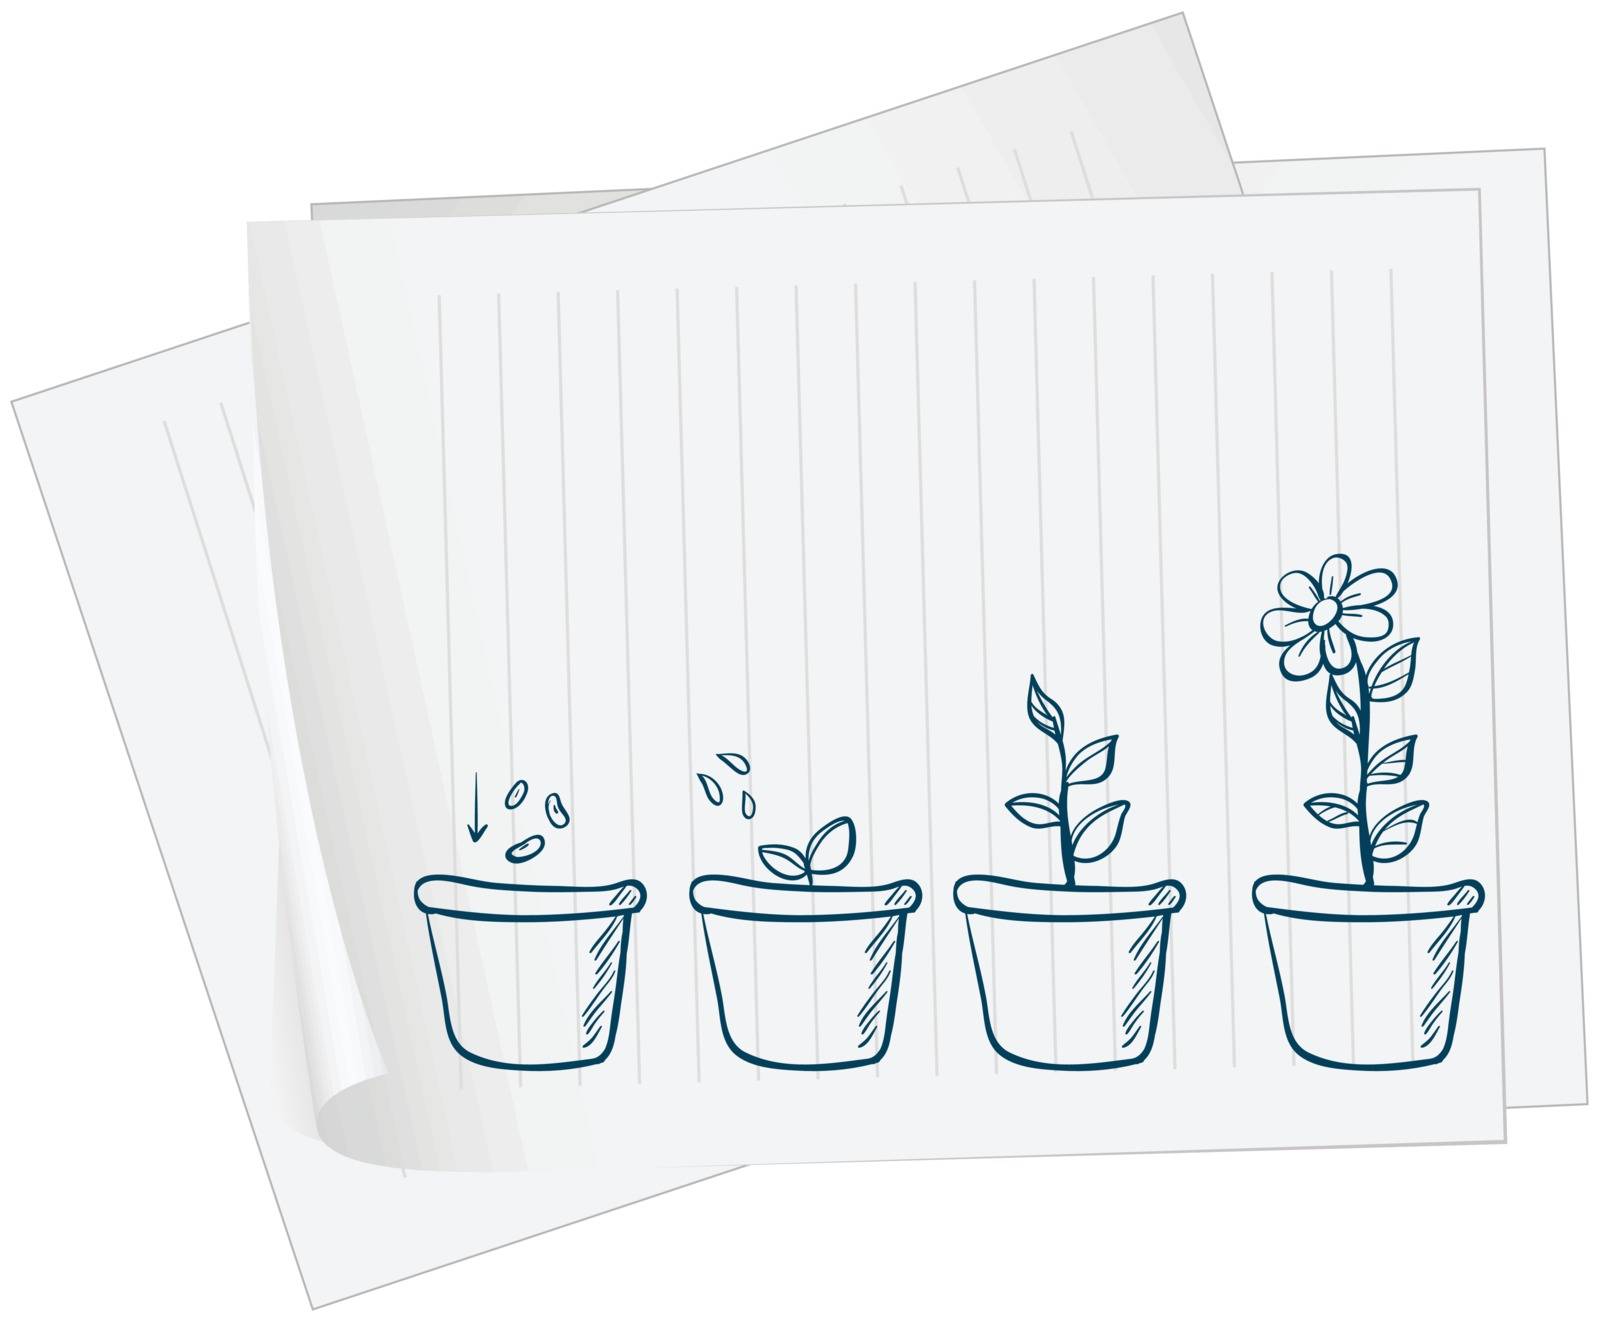 Illustration of a paper with a drawing of a growing plant on a white background